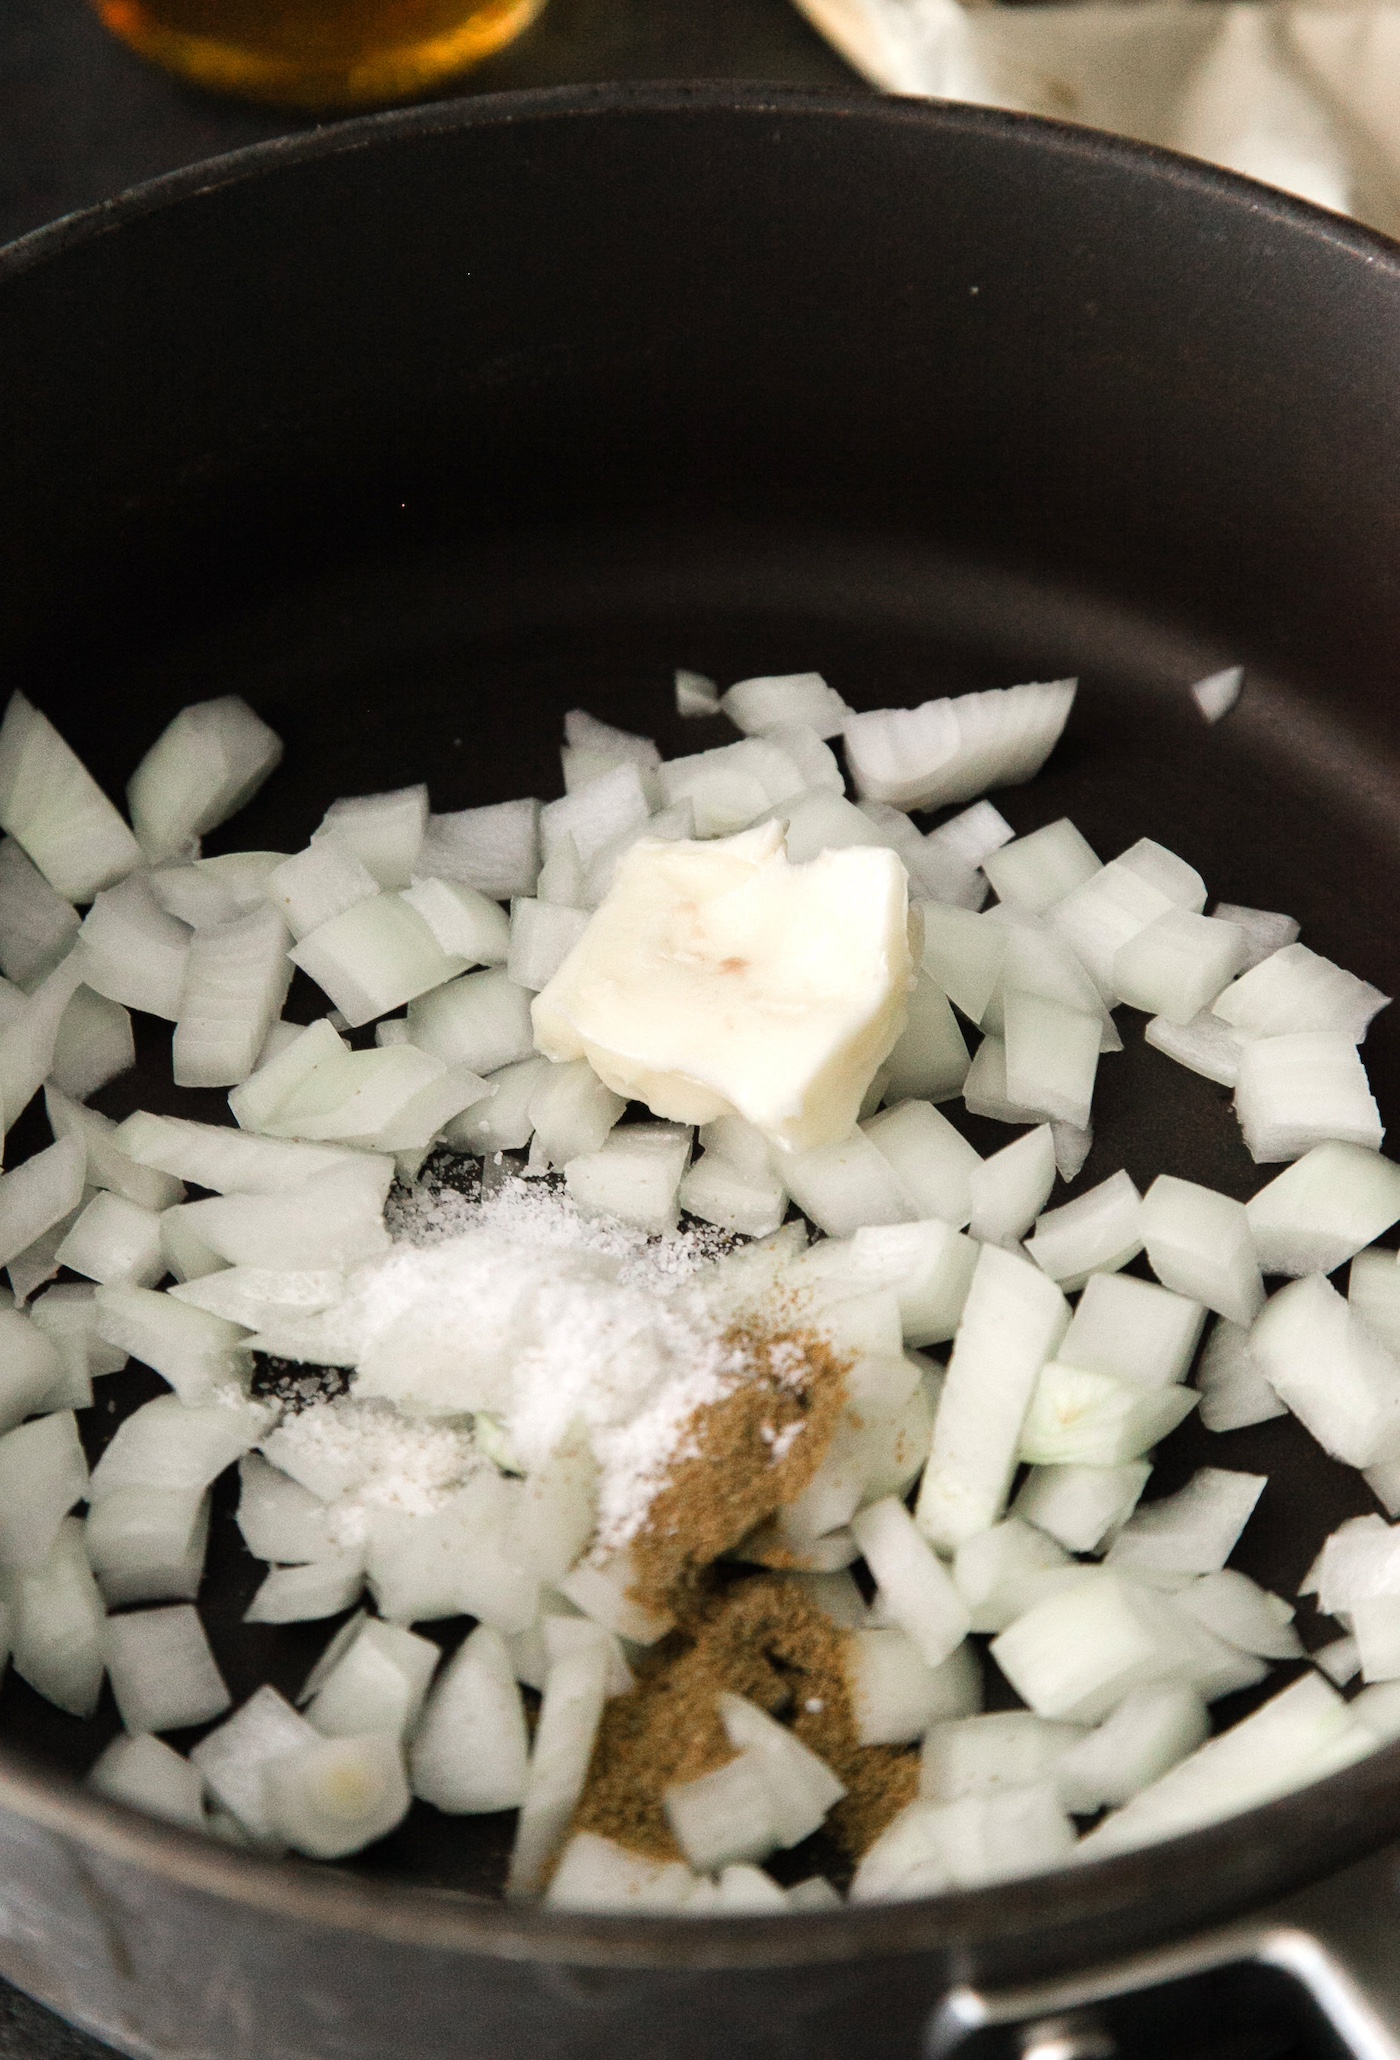 Diced onions with salt, olive oil, and garlic powder